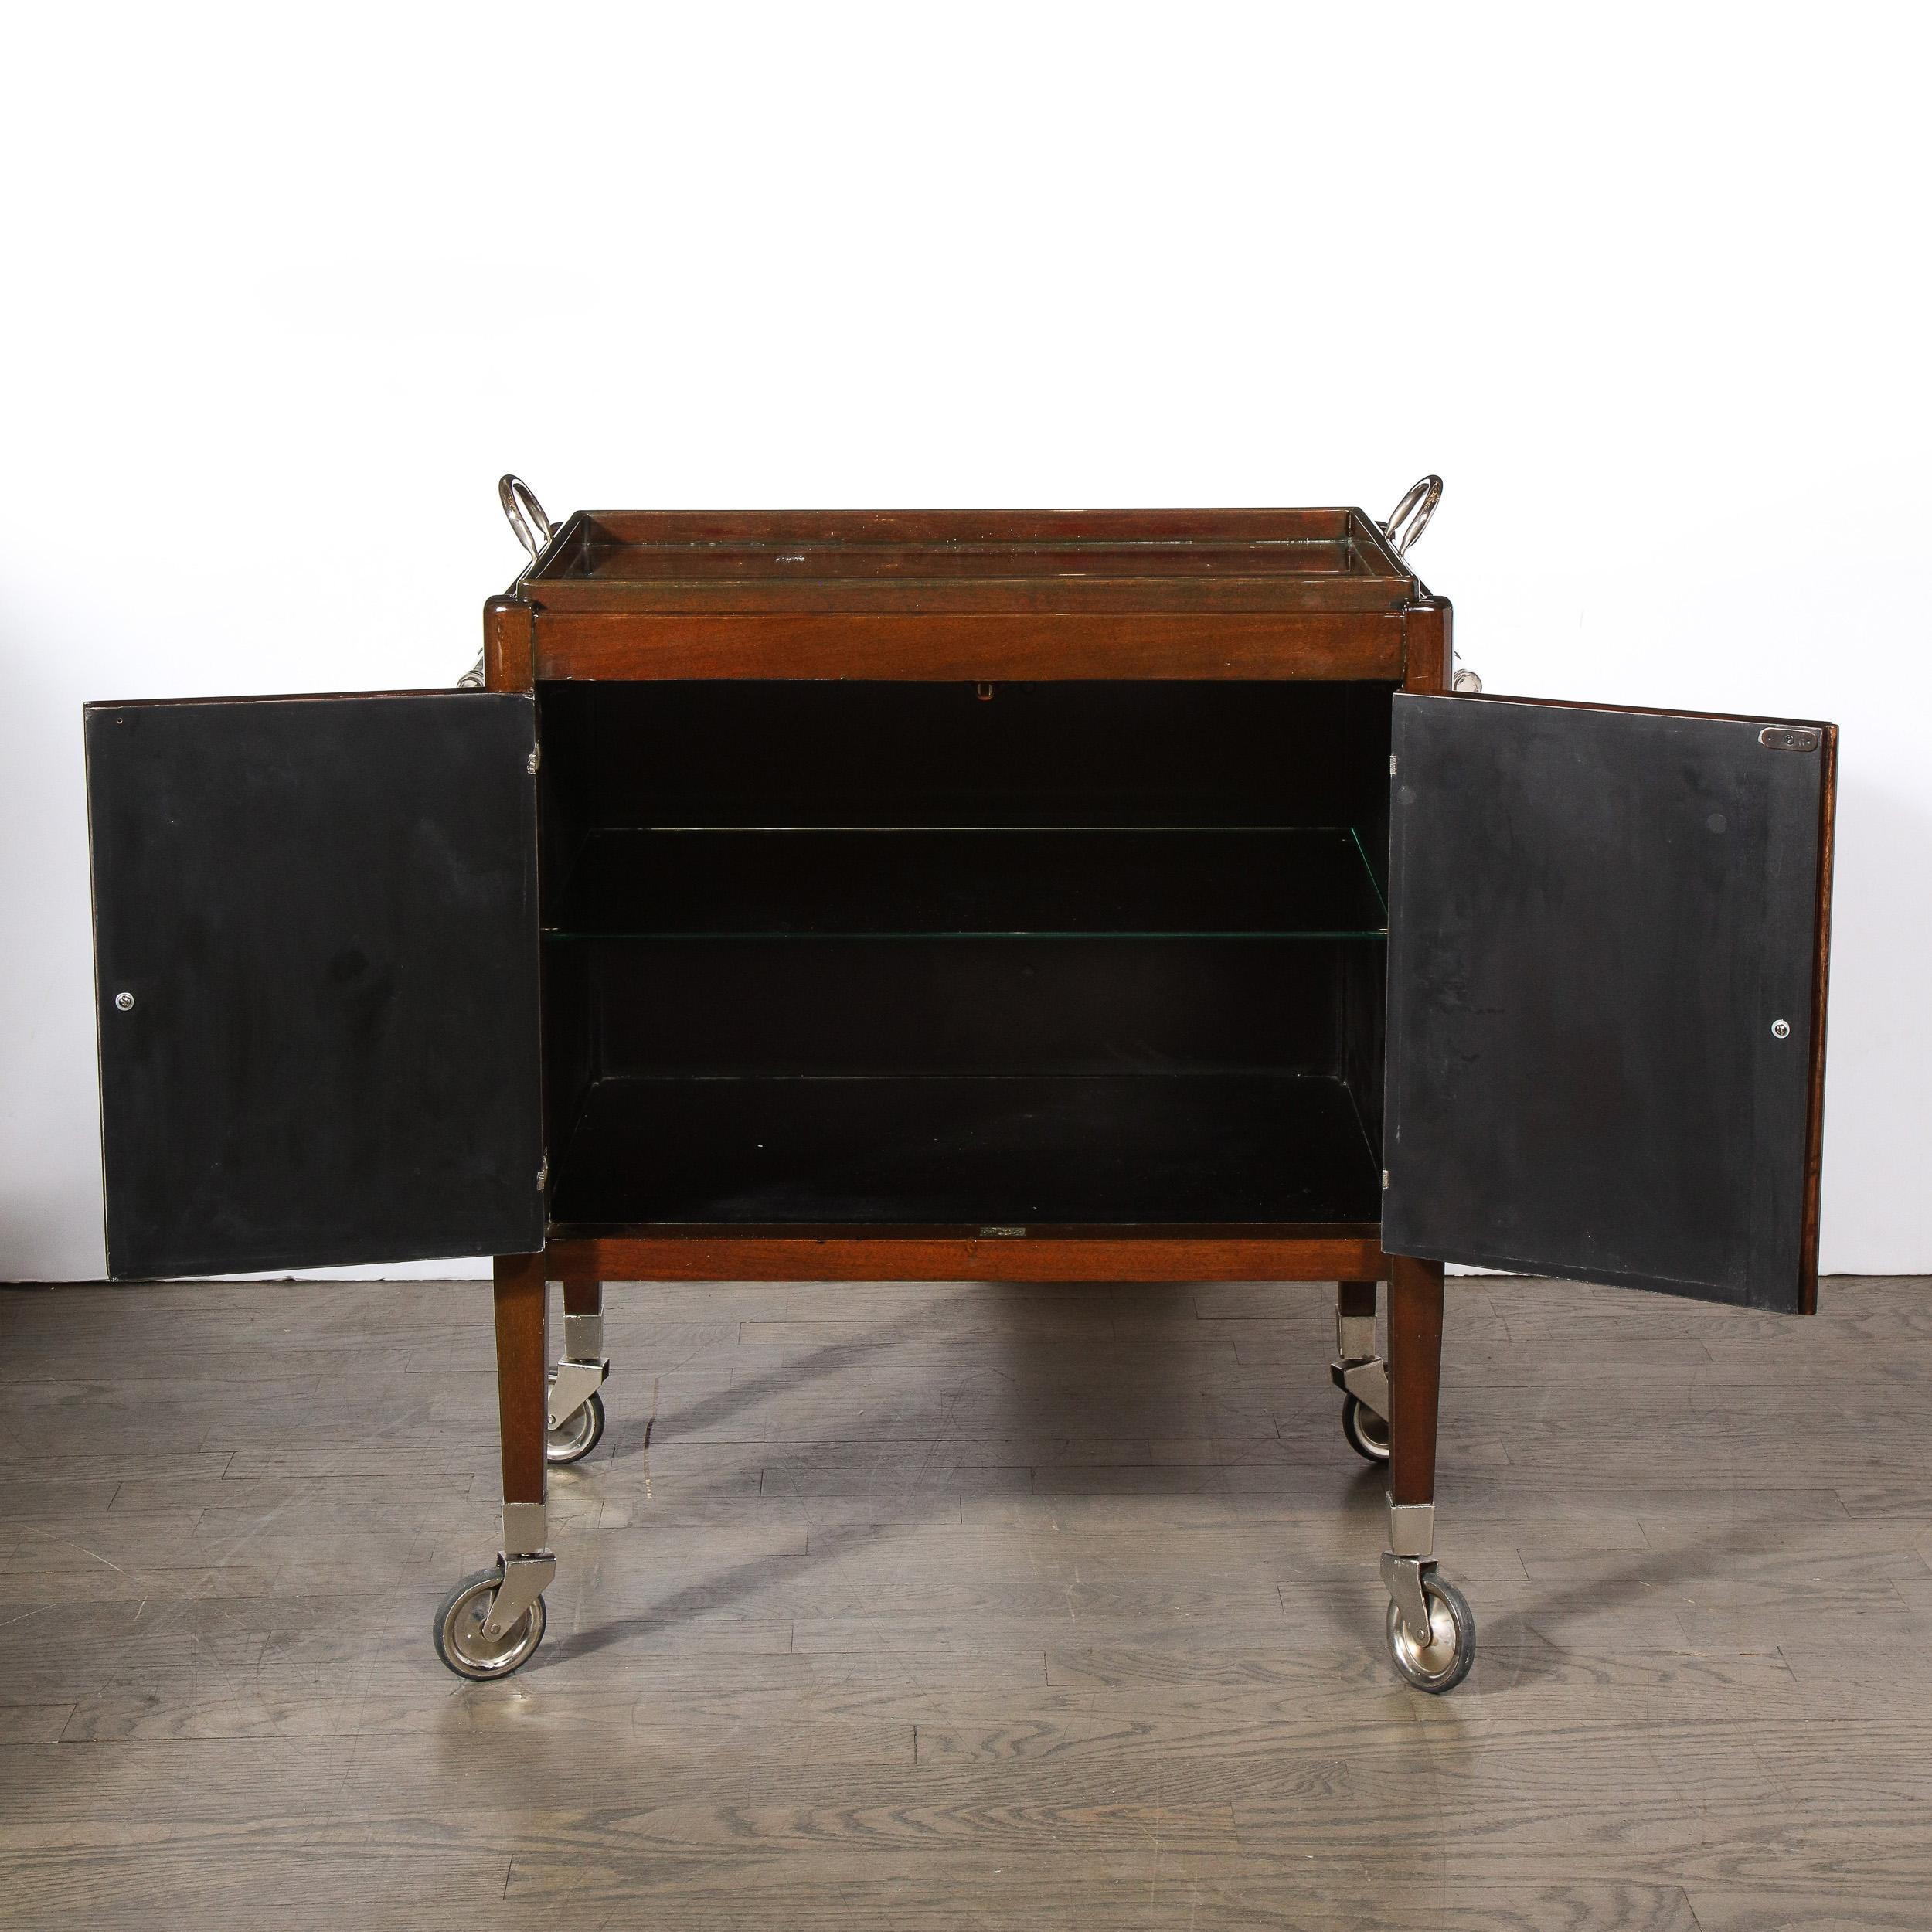 French Art Deco Bookmatched Walnut Bar Cart with Nickeled Details & Removable Tray